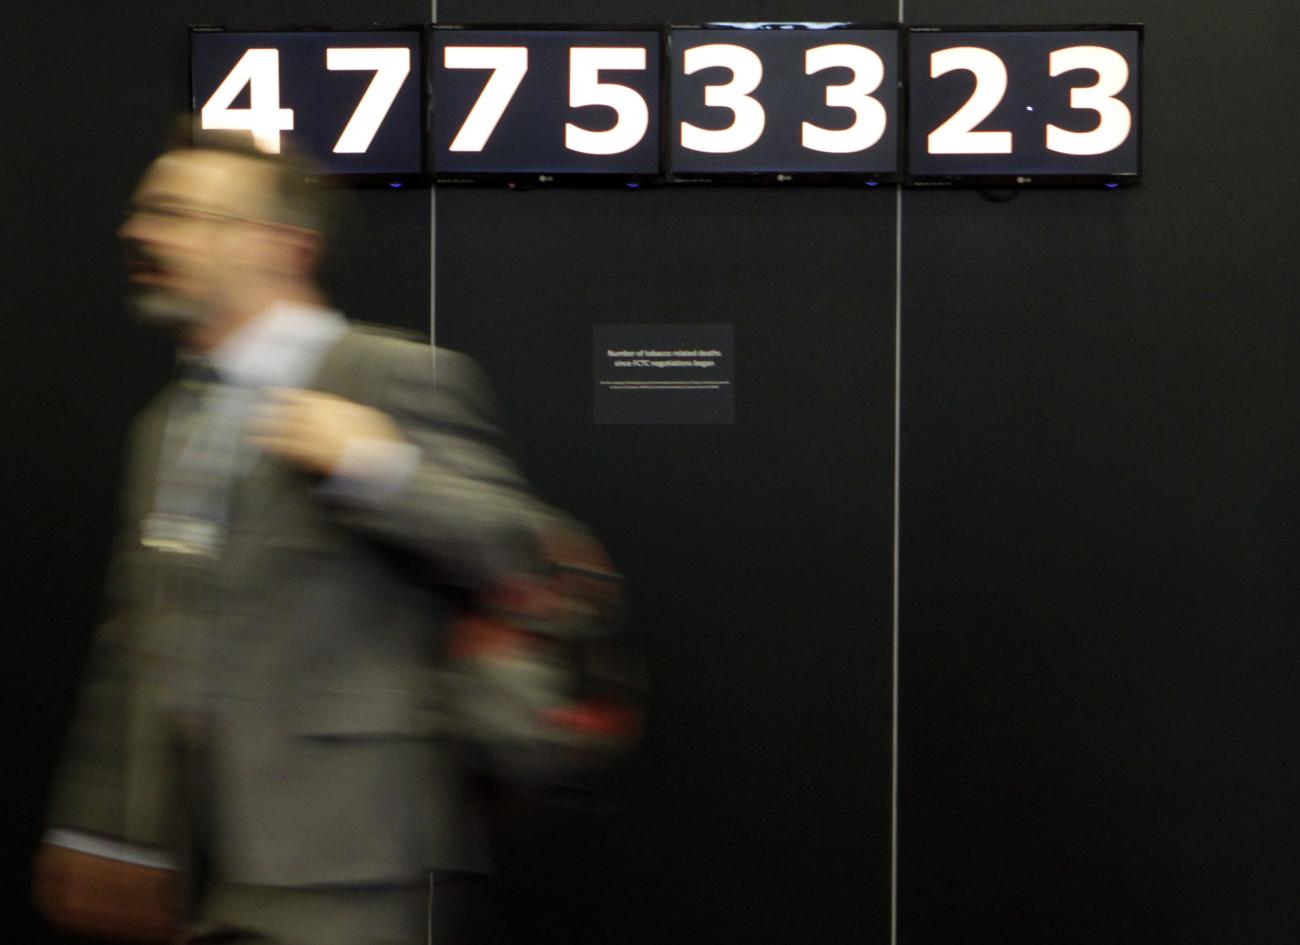 Delegates walk past the Death Clock before a Framework Convention Alliance meeting in Geneva March 15, 2010. The Death Clock counts the number of tobacco-related deaths since October 25, 1999. 